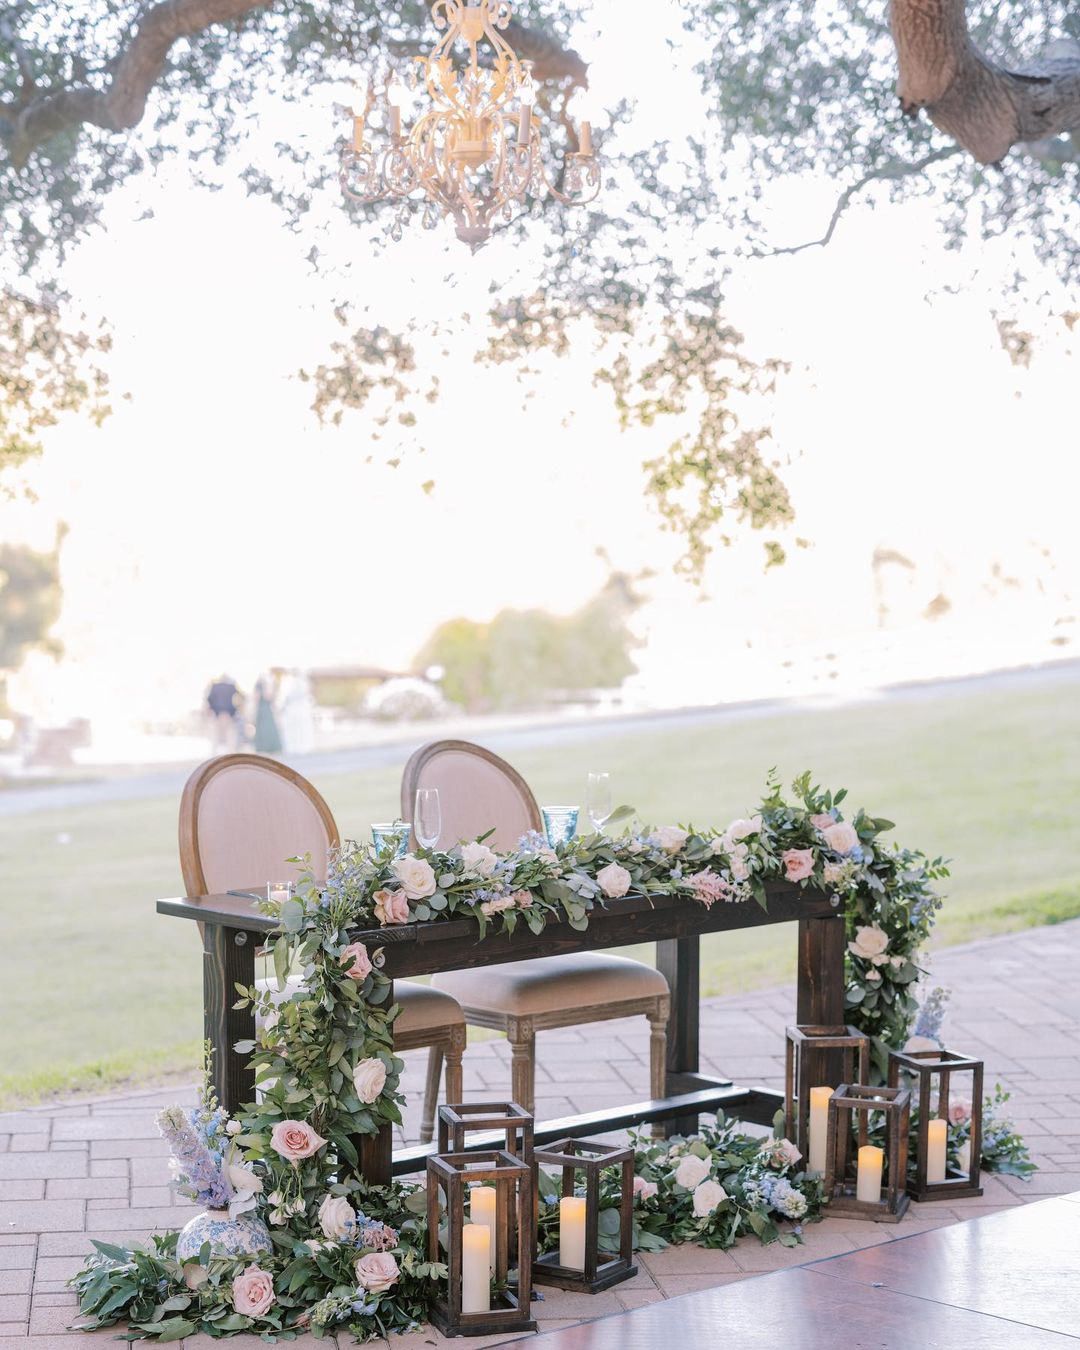 modern wedding decor florisitcs and greenery in rustic style